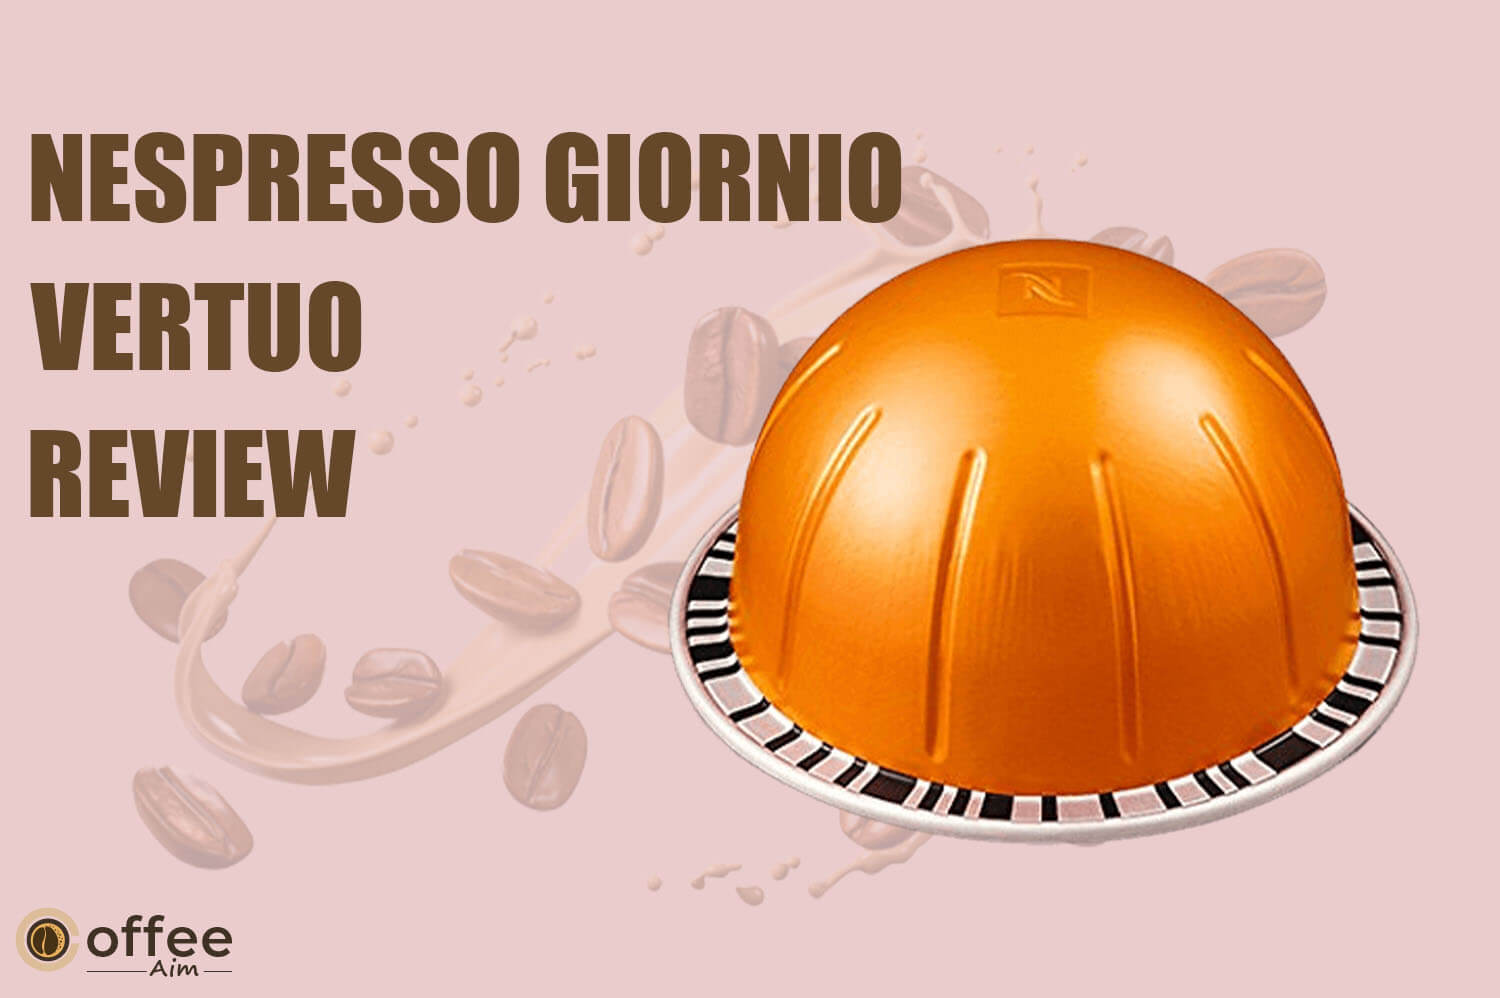 Featured image for the article "Nespresso Giornio review"